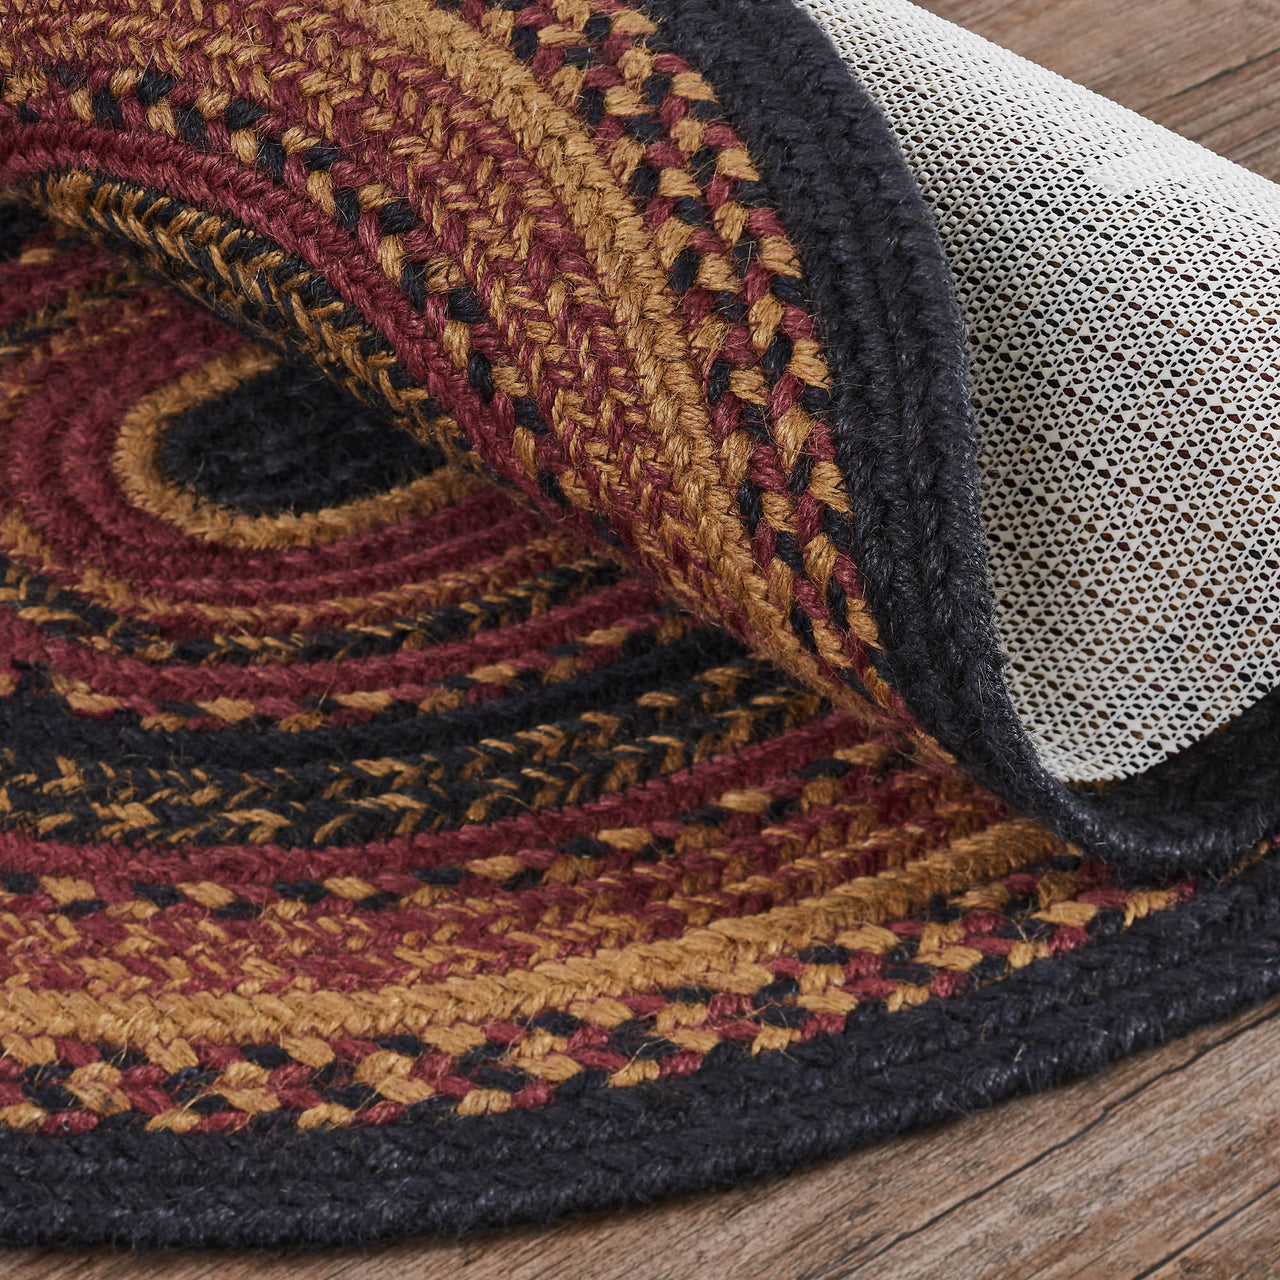 Heritage Farms Jute Braided Rug Oval with Rug Pad 27"x48" VHC Brands